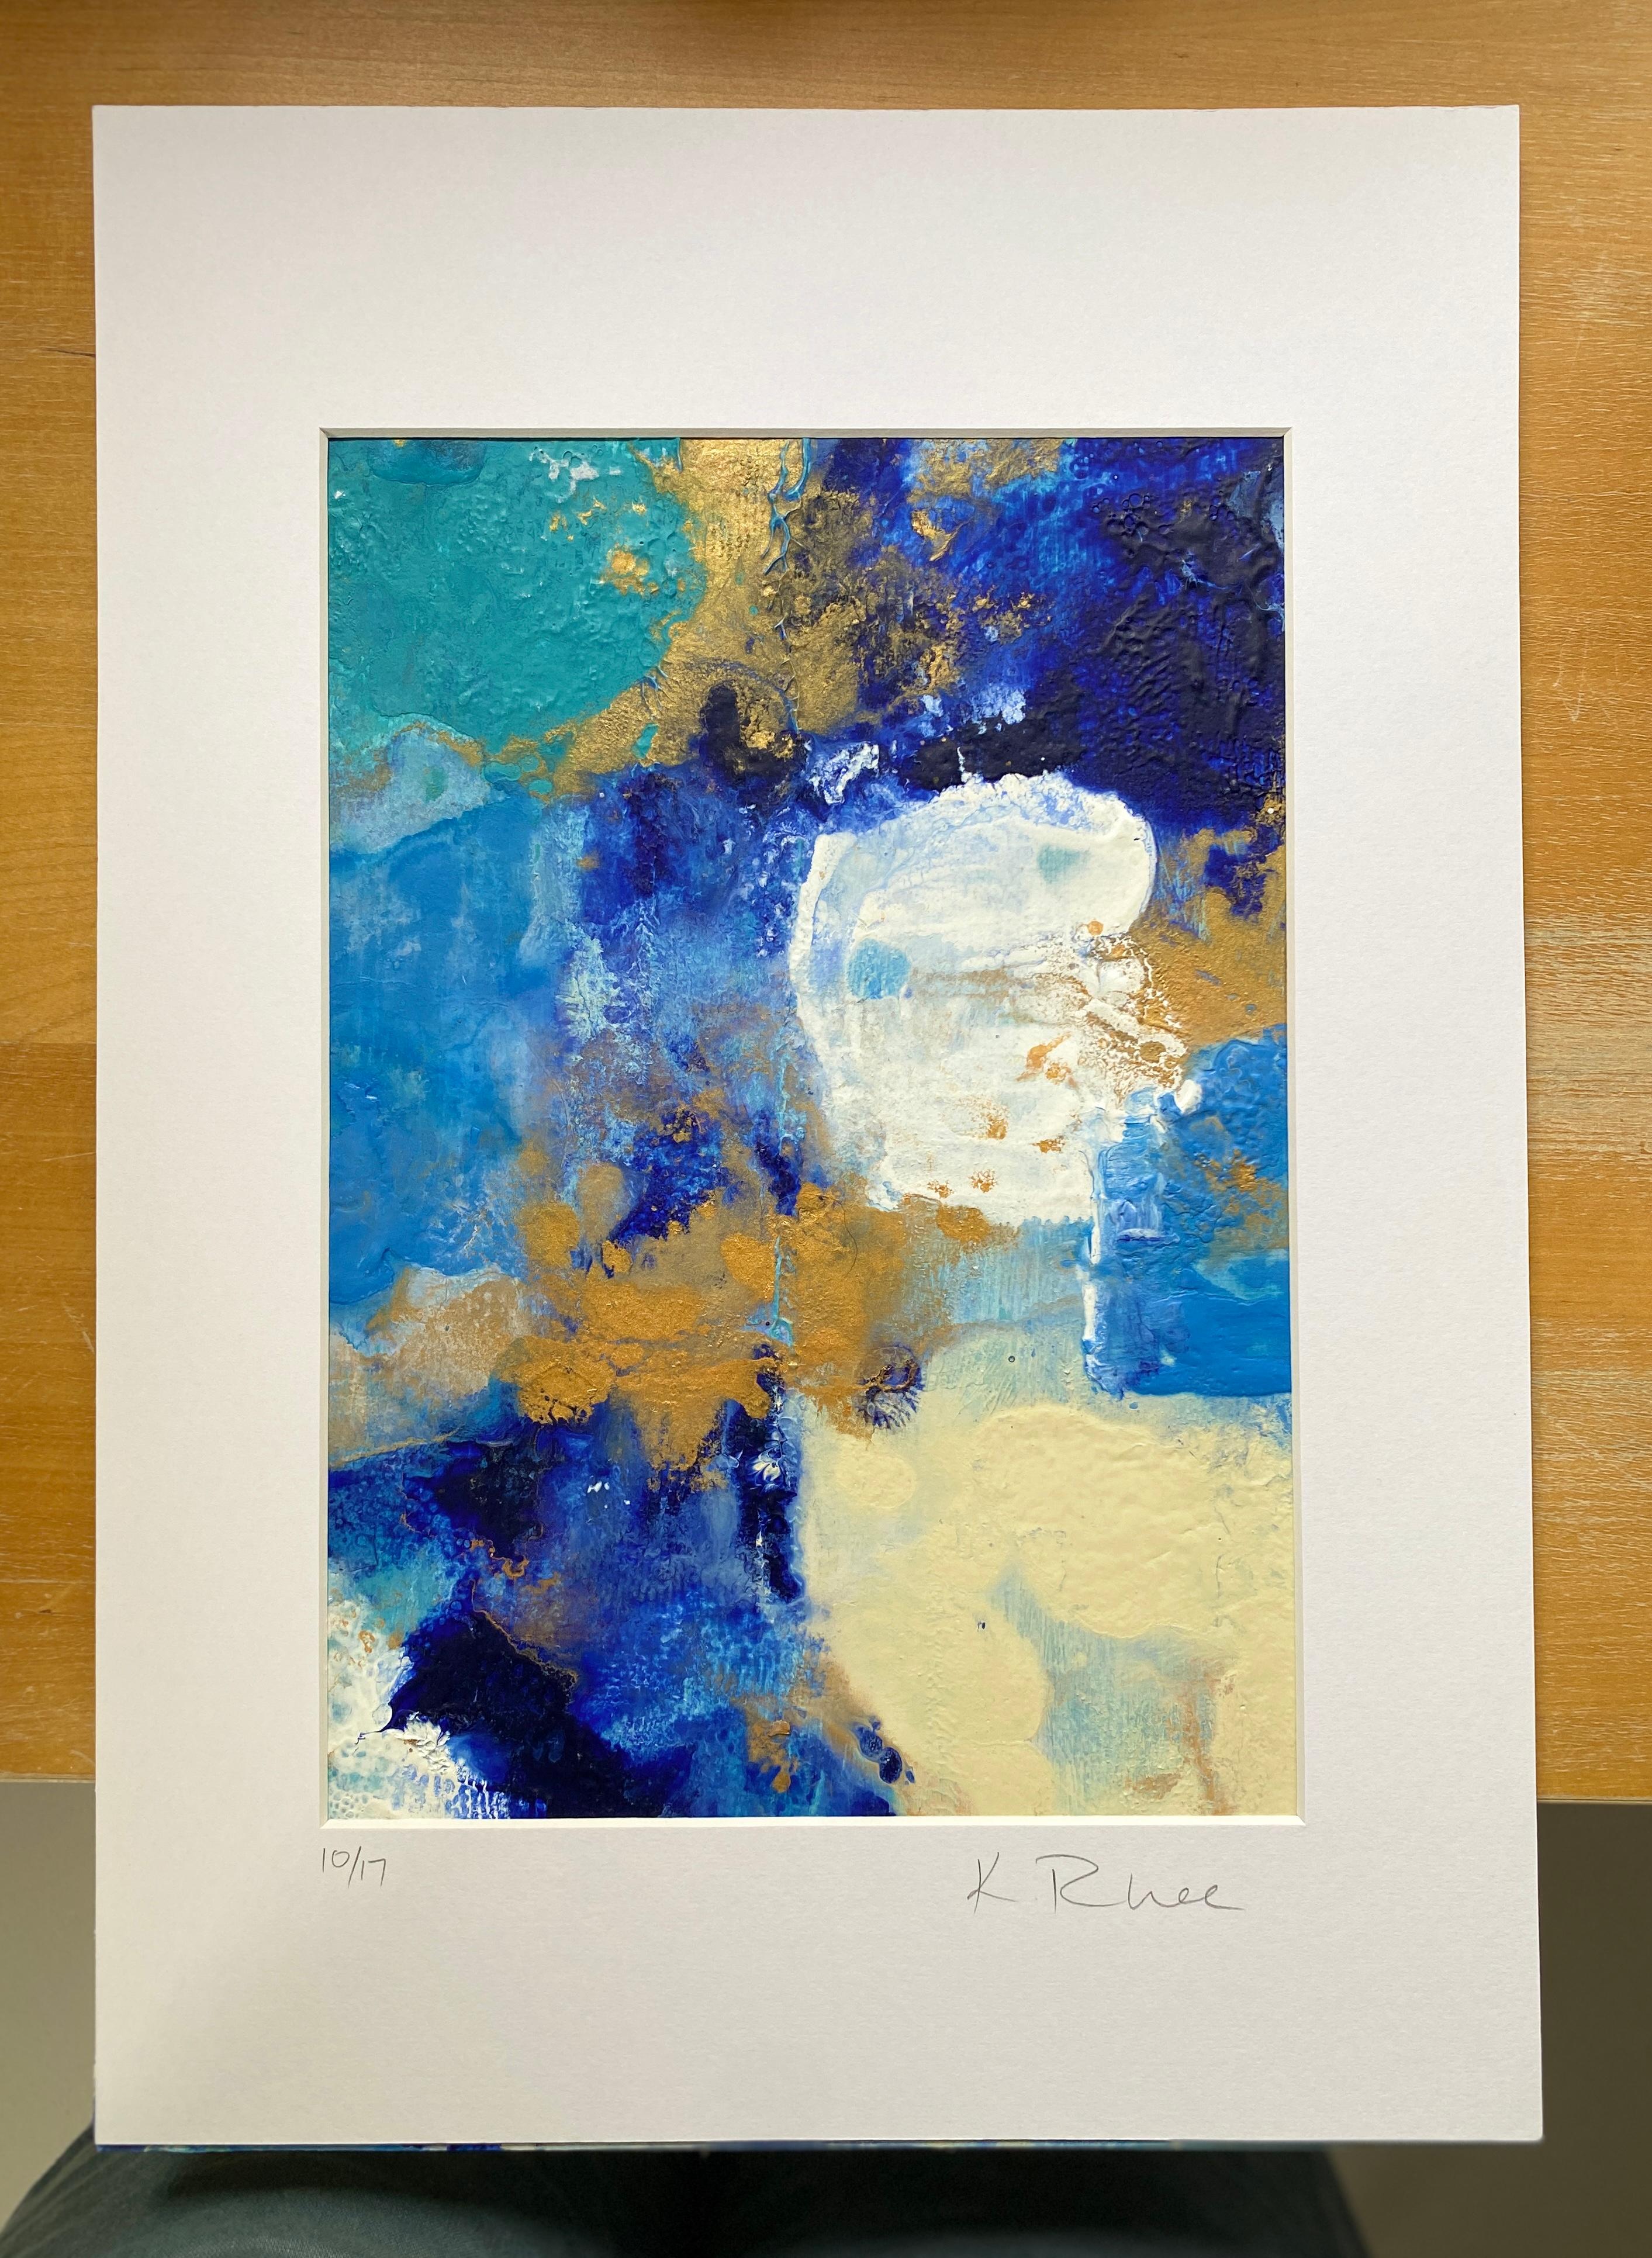 Water and Cloud Series no3 small abstract on paper framed in white mat board - Abstract Expressionist Painting by Kathleen Rhee